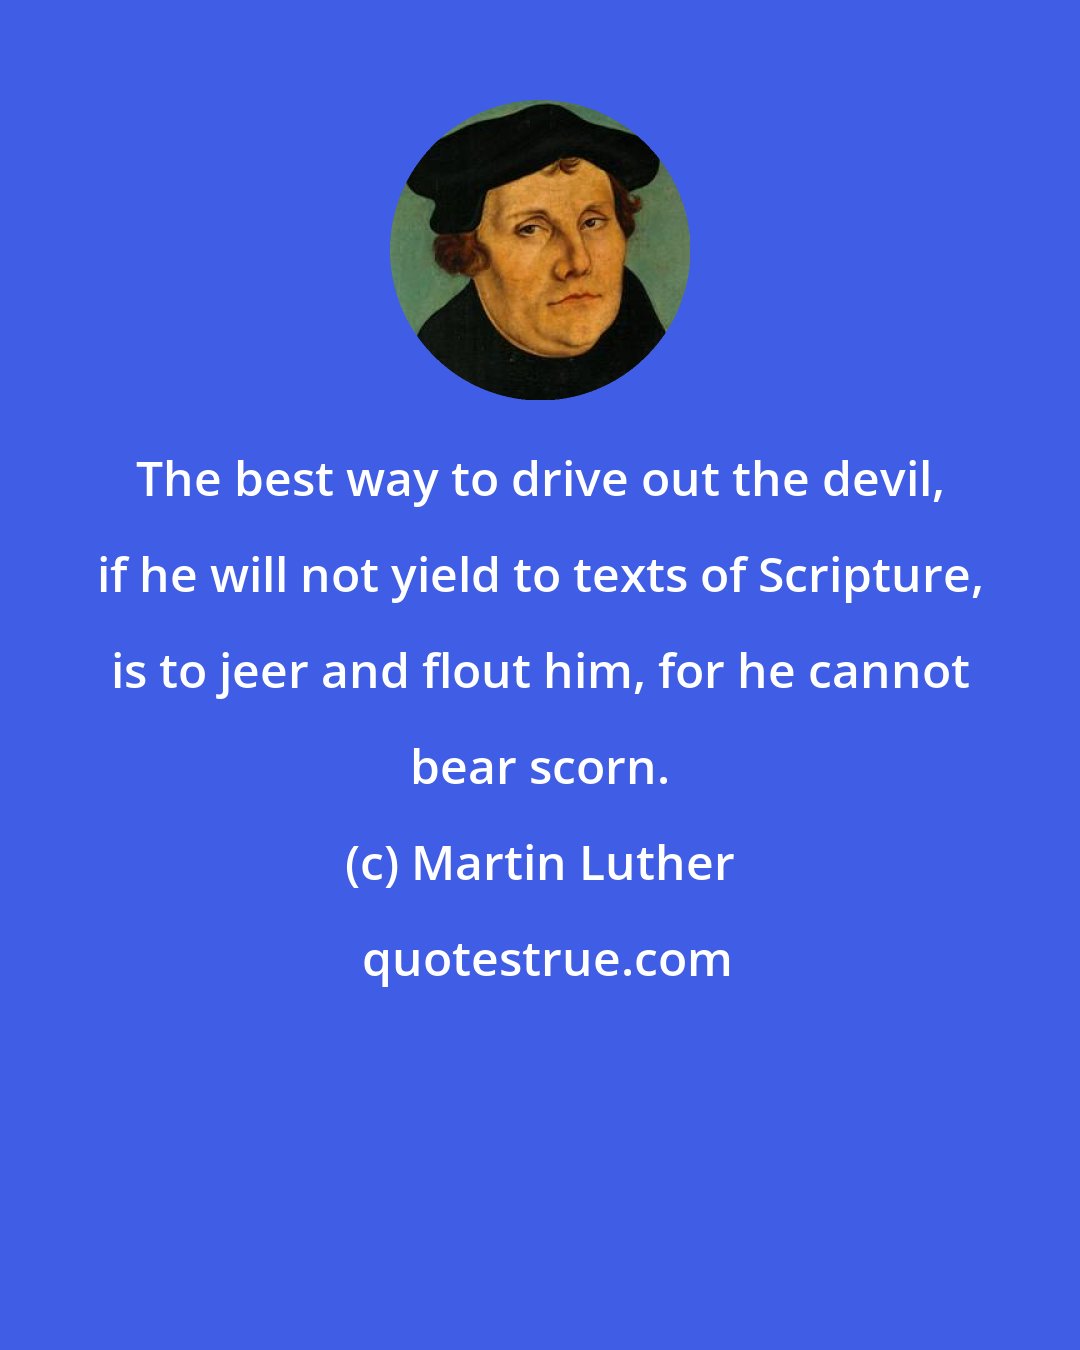 Martin Luther: The best way to drive out the devil, if he will not yield to texts of Scripture, is to jeer and flout him, for he cannot bear scorn.